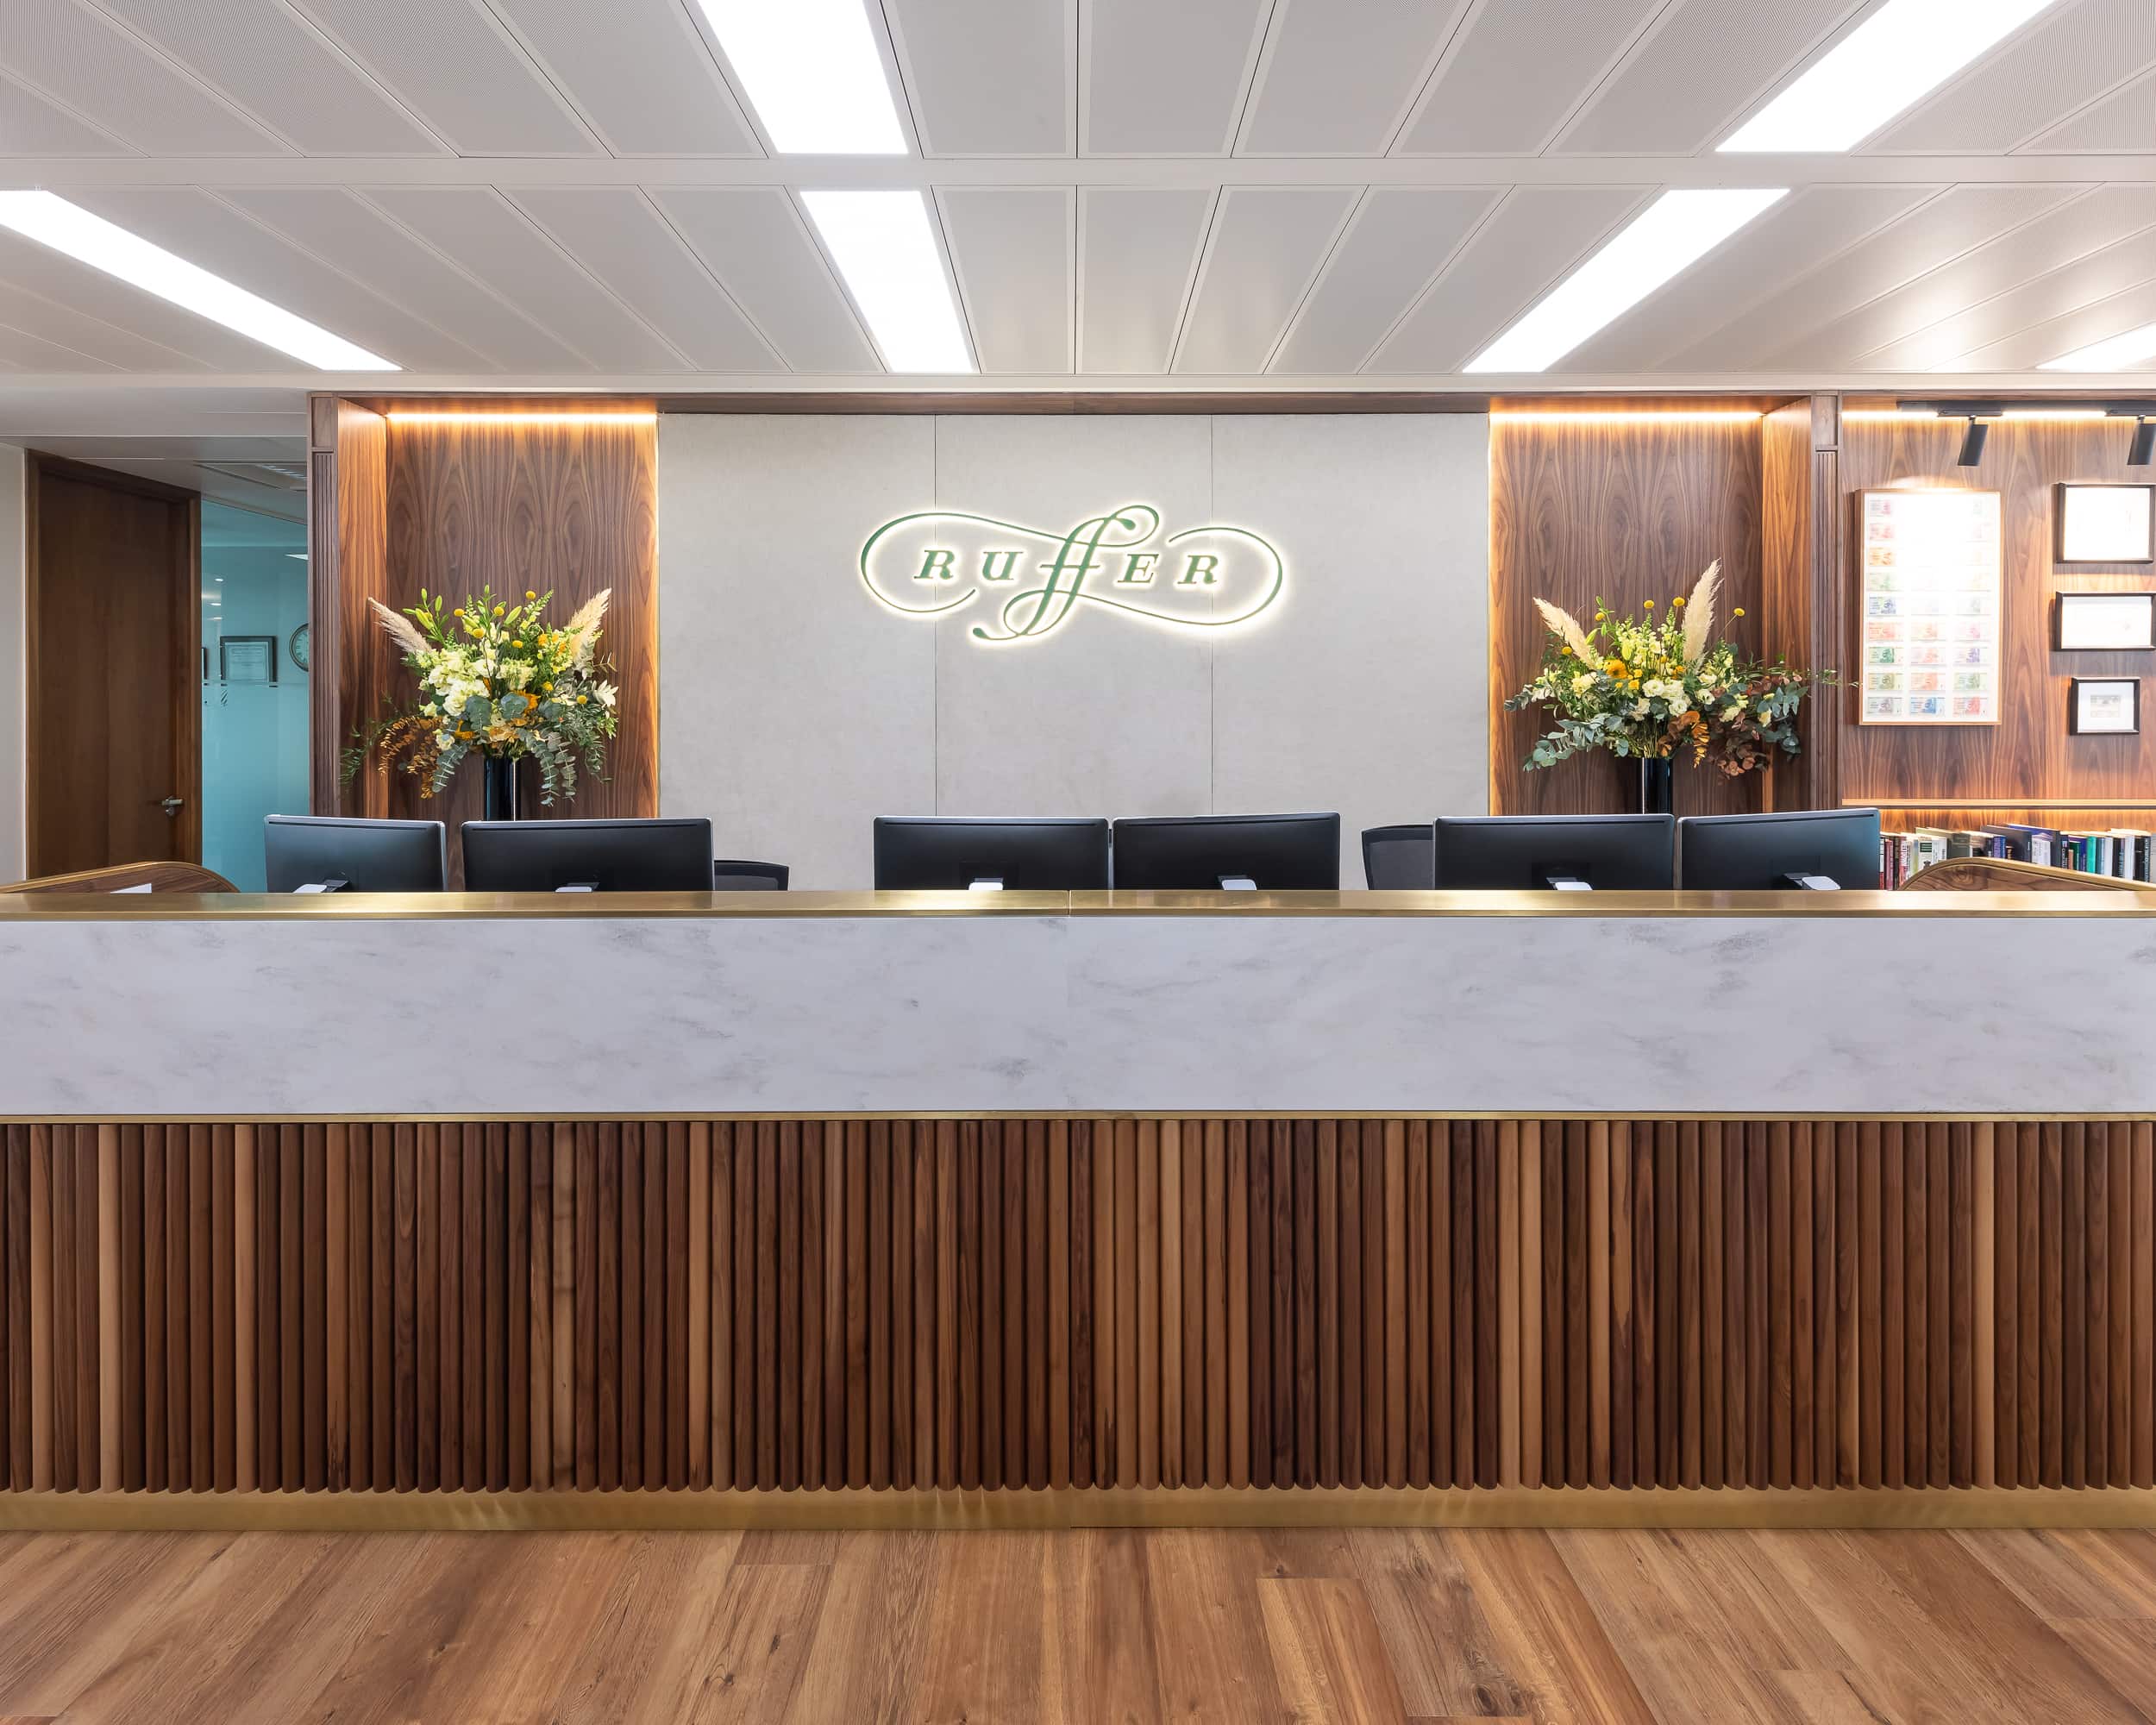 Ruffer's London workplace reception desk with brand graphics on the wall behind